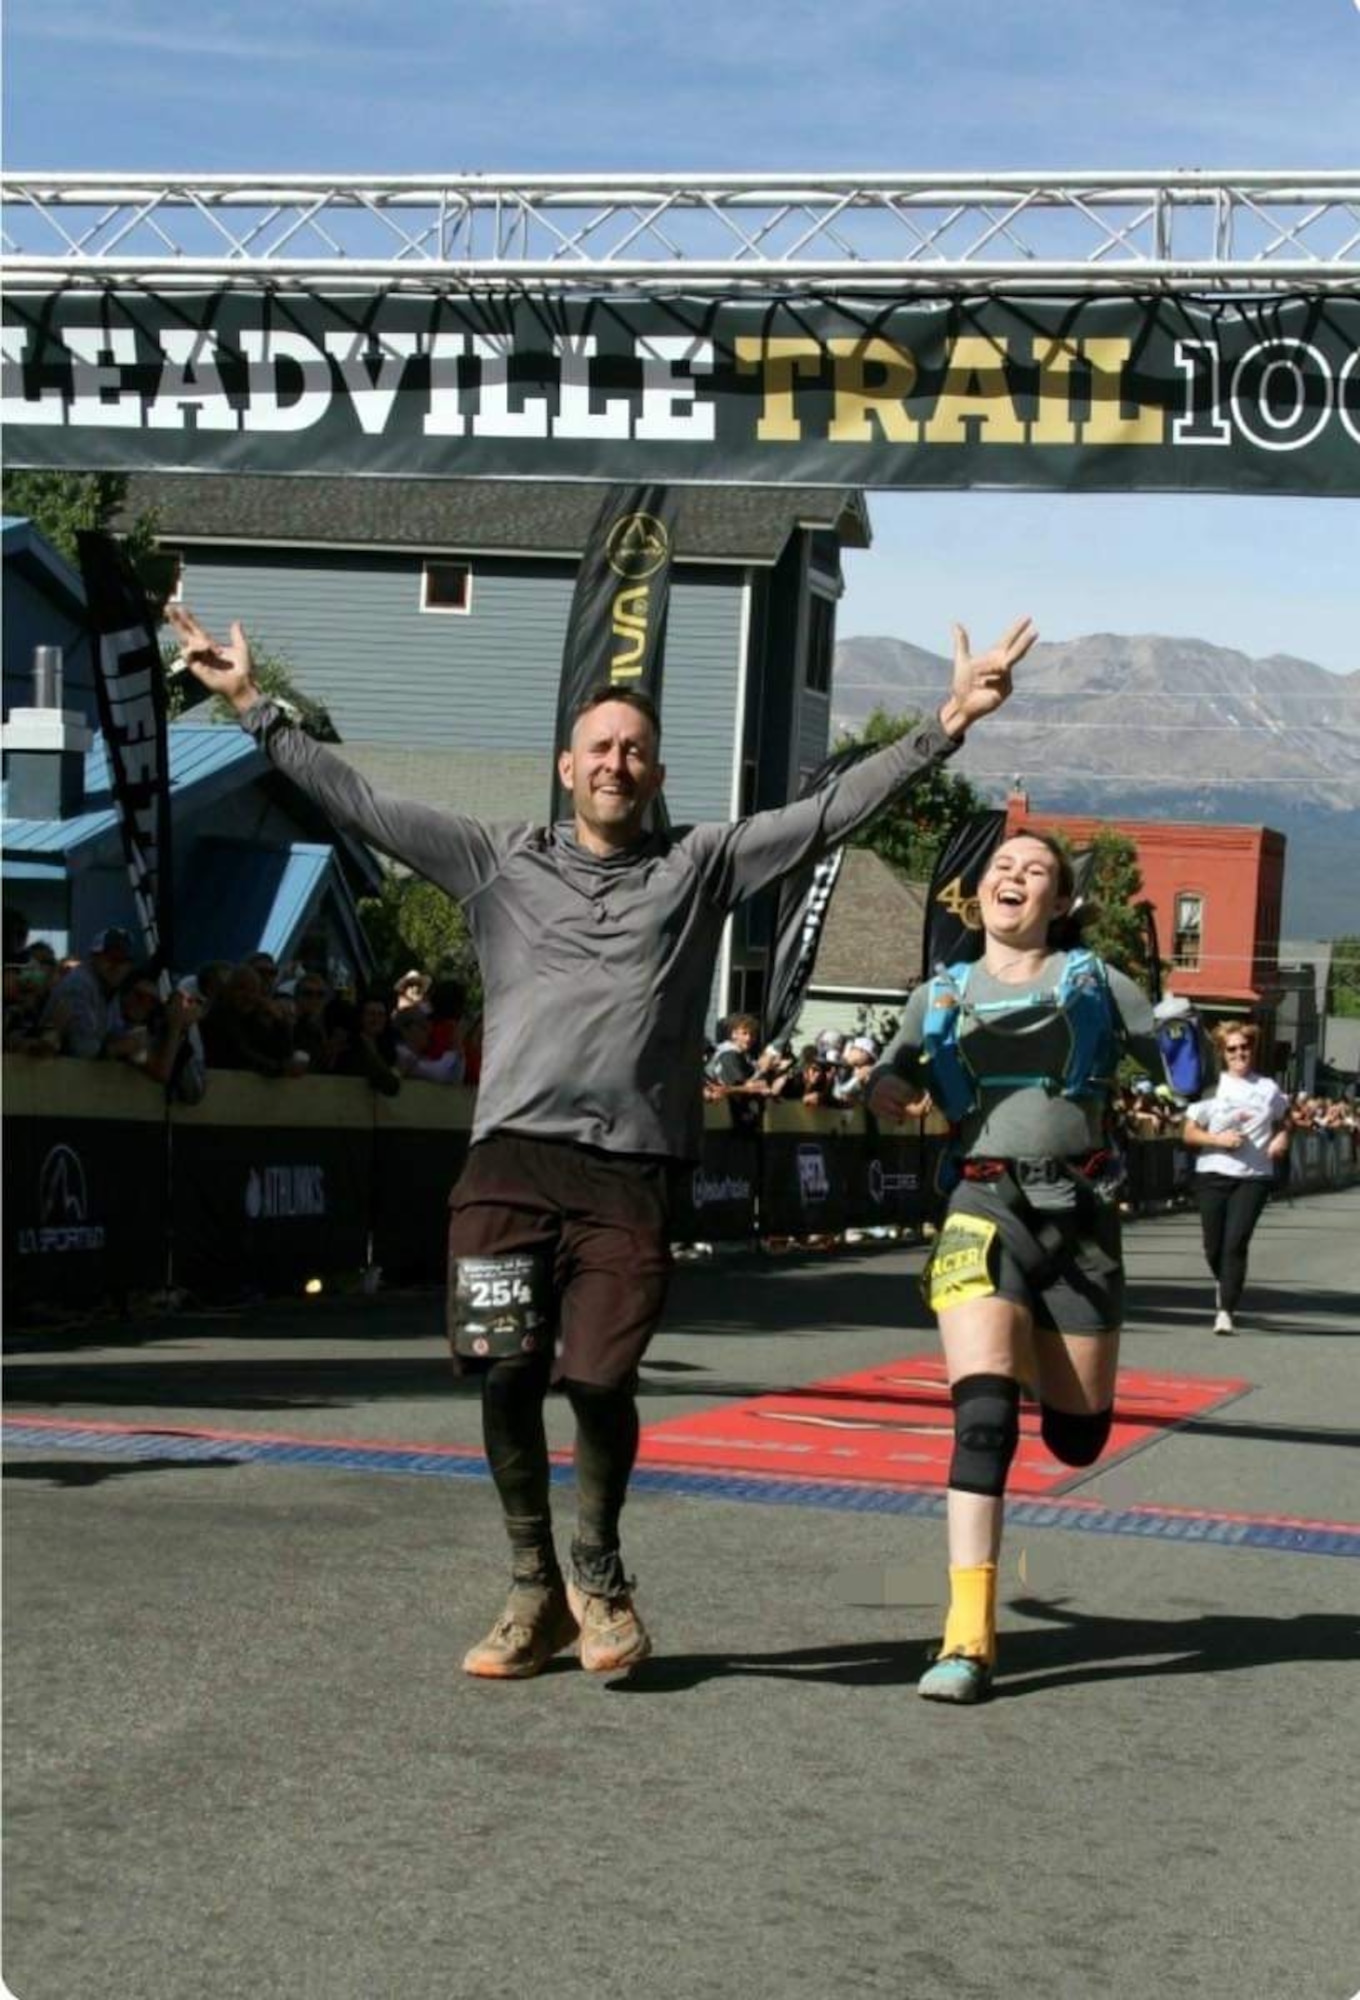 Patrick Buzzard, 4th Test and Evaluation Squadron security manager, left, and his daughter, Hailey Buzzard, right, cross the finish line of the Leadville Trail 100 Run near Leadville, Colorado, Aug. 20, 2023. Hailey paced her father for the final 12.4 miles of the race. The Leadville Trail 100 Run is an ultramarathon held annually on rugged trails and dirt roads through the heart of the Rocky Mountains. The course is a 50-mile out-and-back dogleg run primarily on the Colorado Trail, starting at 10,200 feet. The centerpiece of the course is the climb up to Hope Pass at 12,620 feet, encountered on both the outbound trek and on the return. Buzzard finished the 100-mile course in 29 hours, 48 minutes, and 57 seconds, just beating the 30-hour time limit. (Courtesy photo)